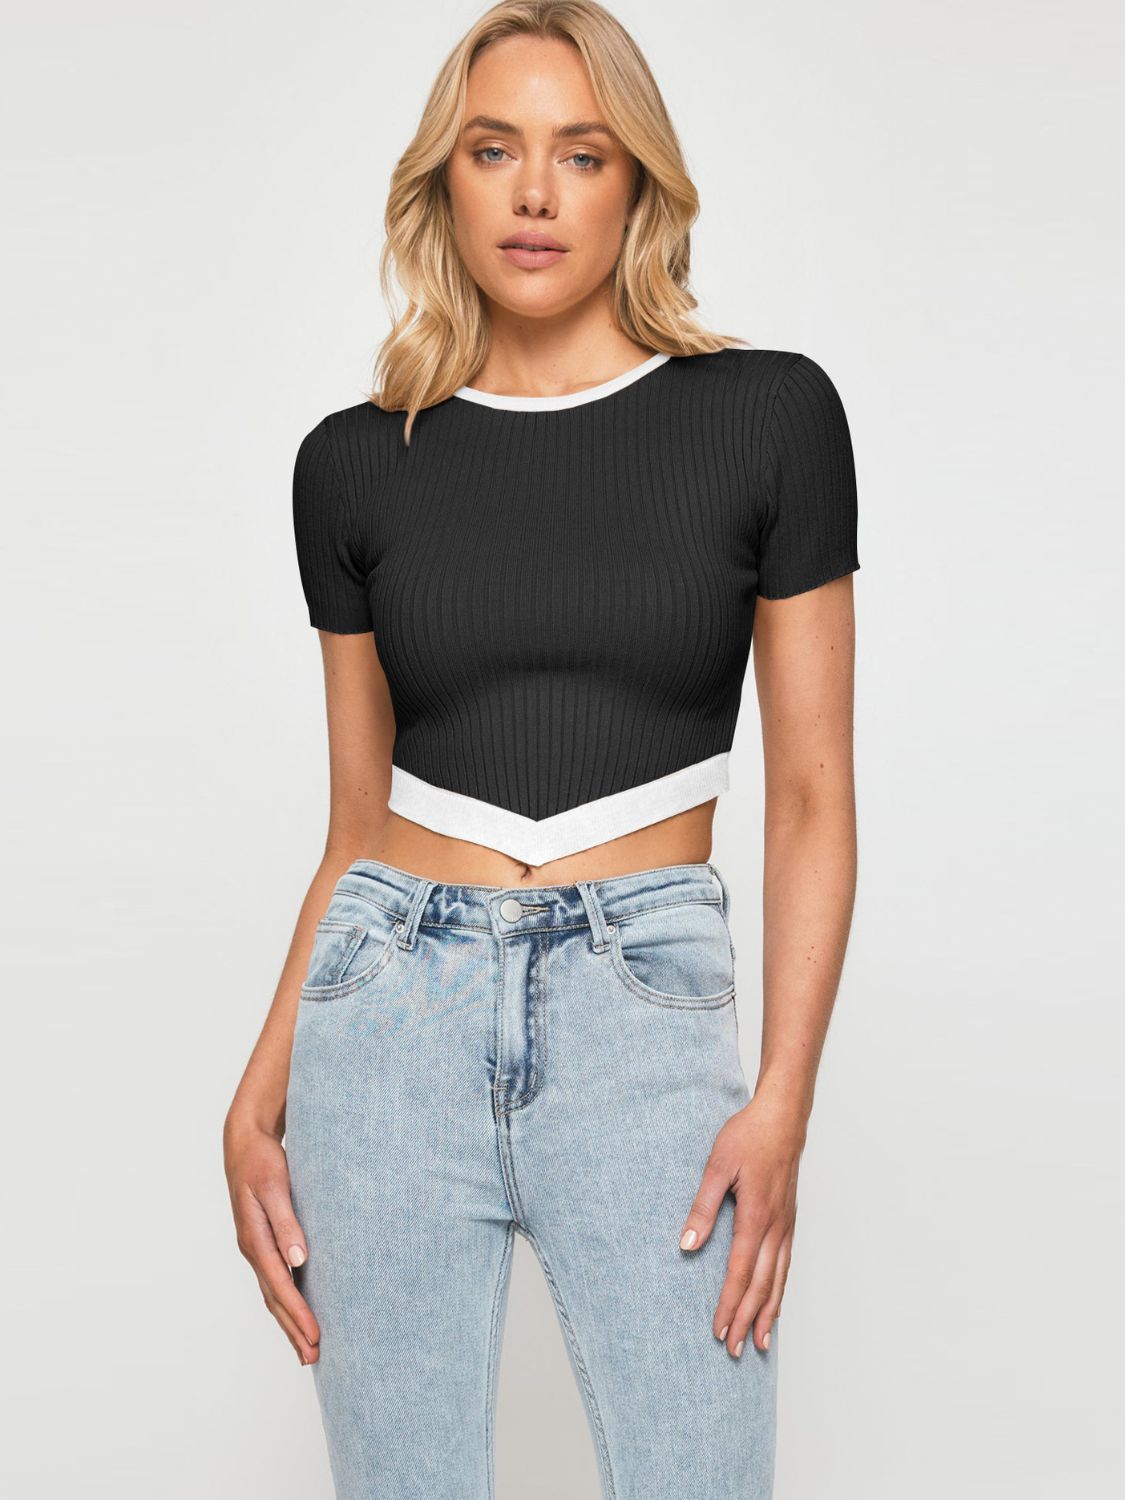 Contrast Trim Pointed Hem Ribbed Crop Top BLUE ZONE PLANET